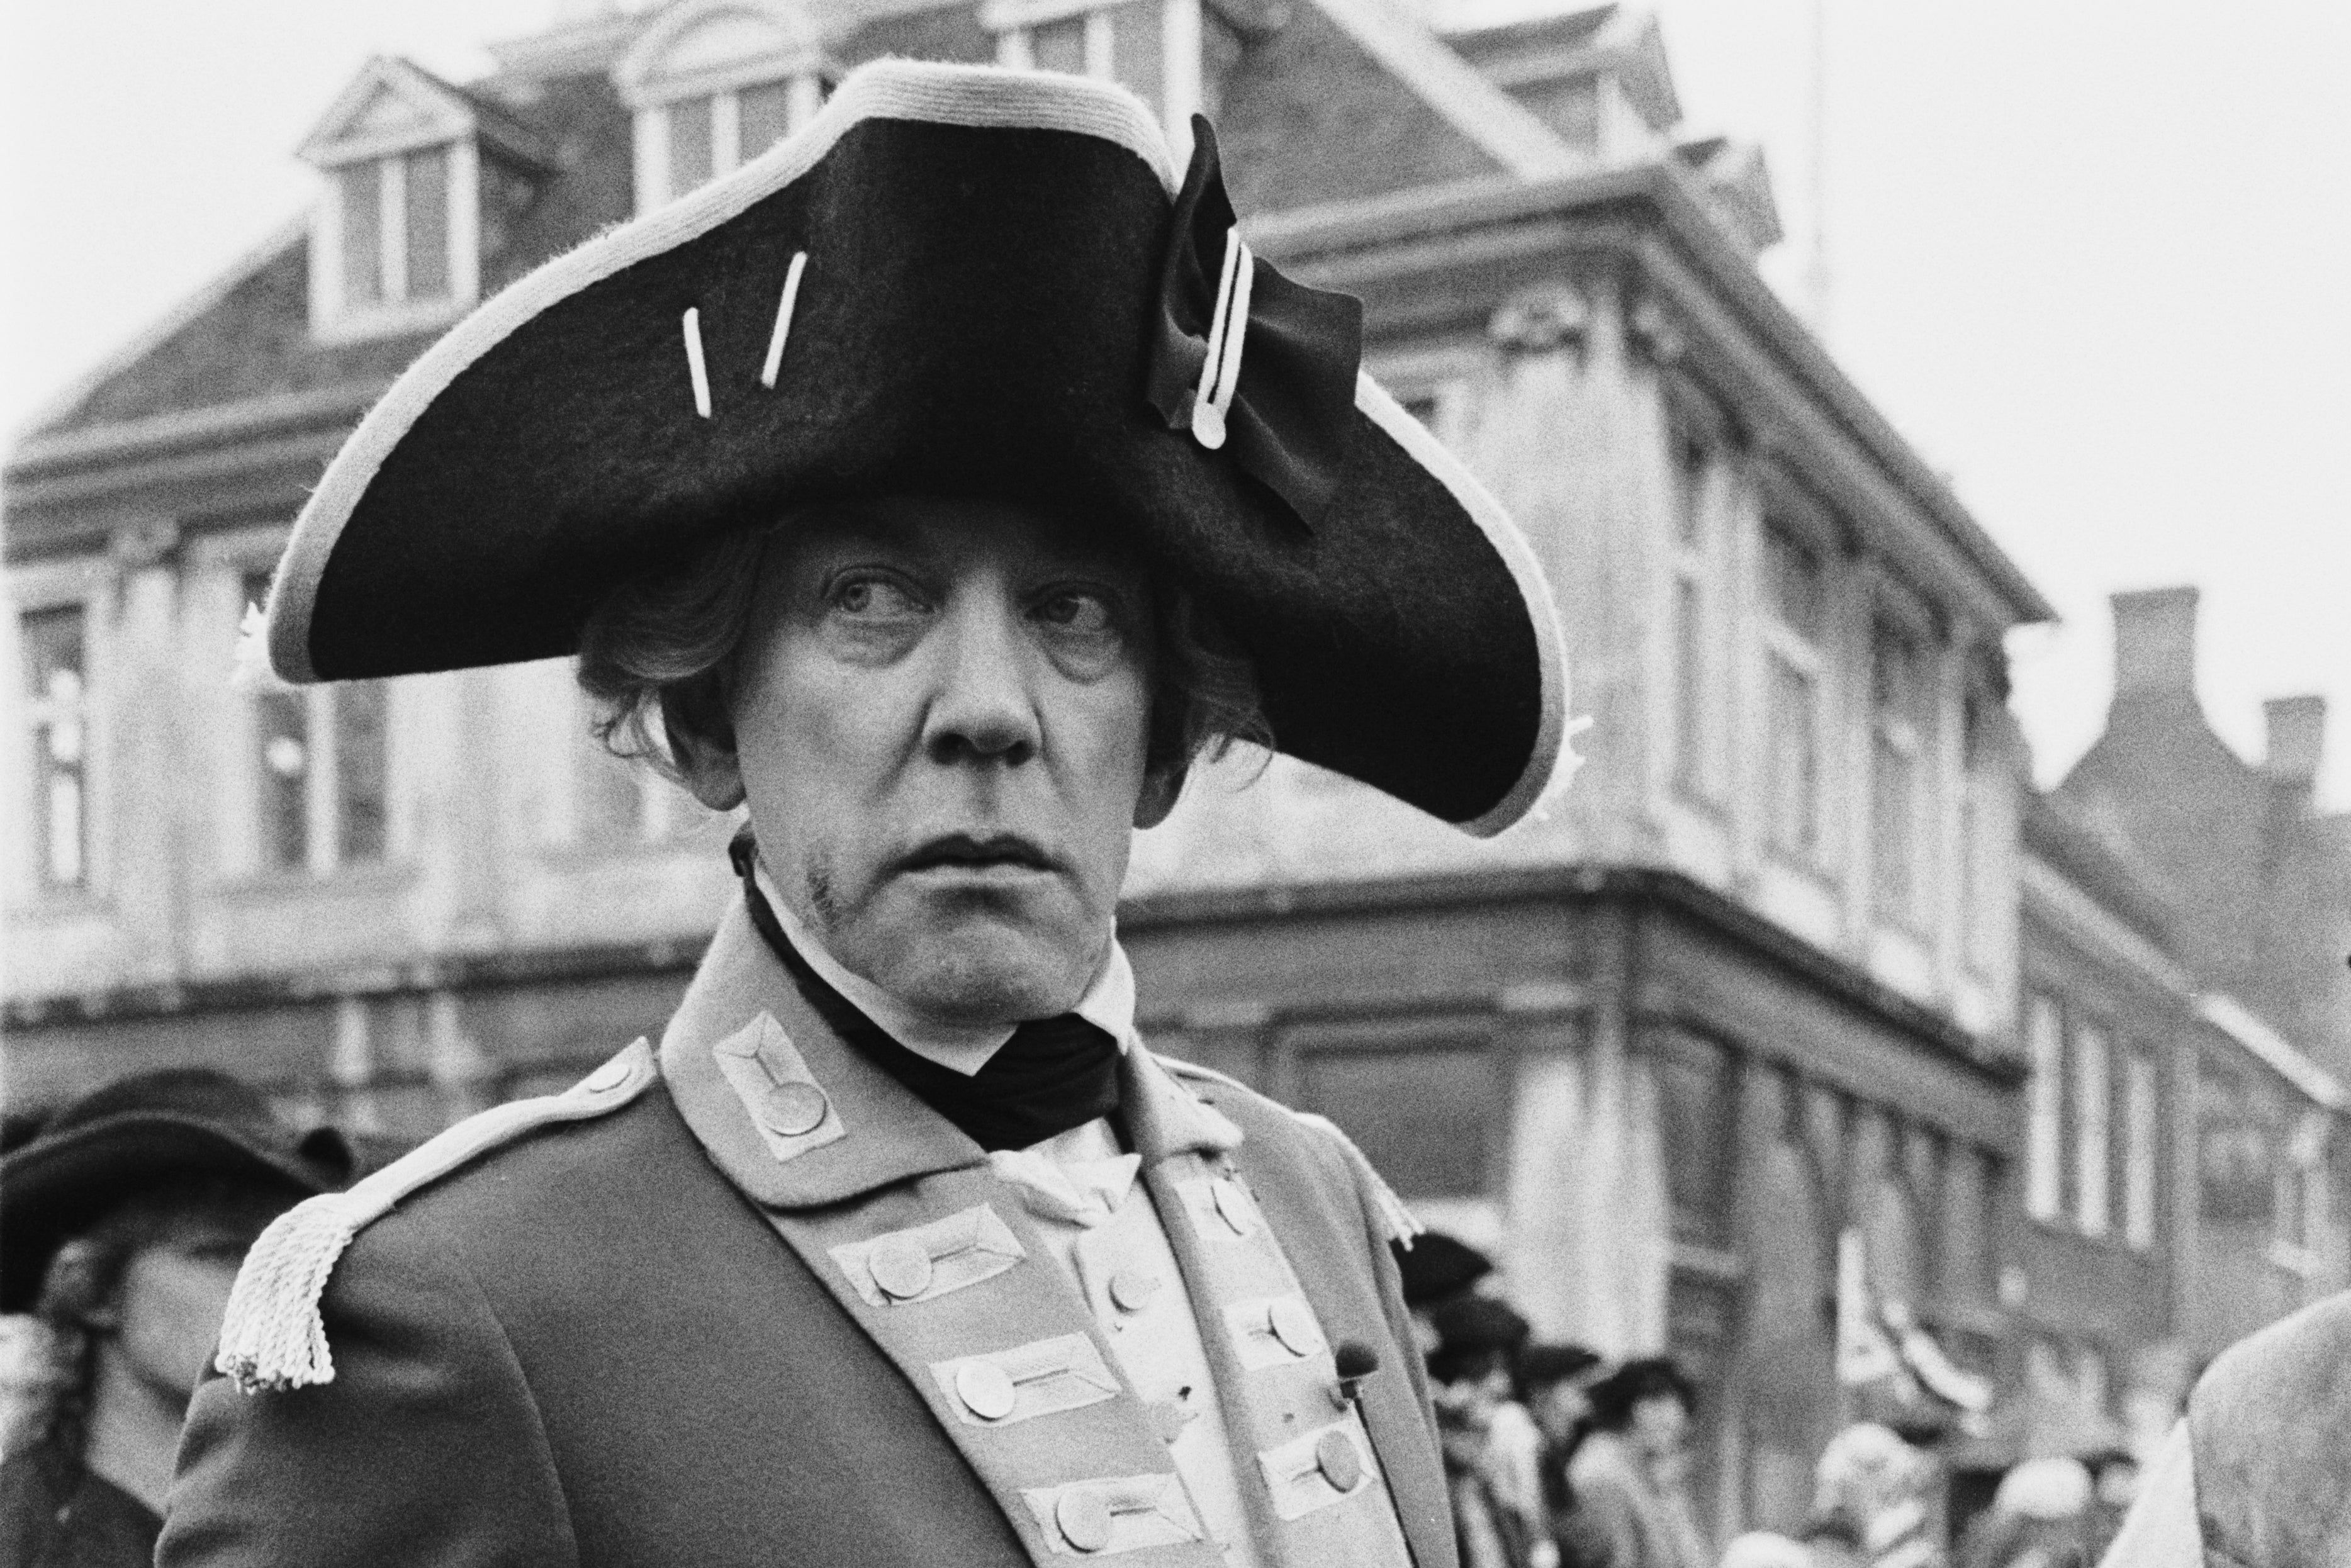 Sutherland in period costume as Sgt Maj Peasy for the historical drama ‘Revolution’, March 25, 1985